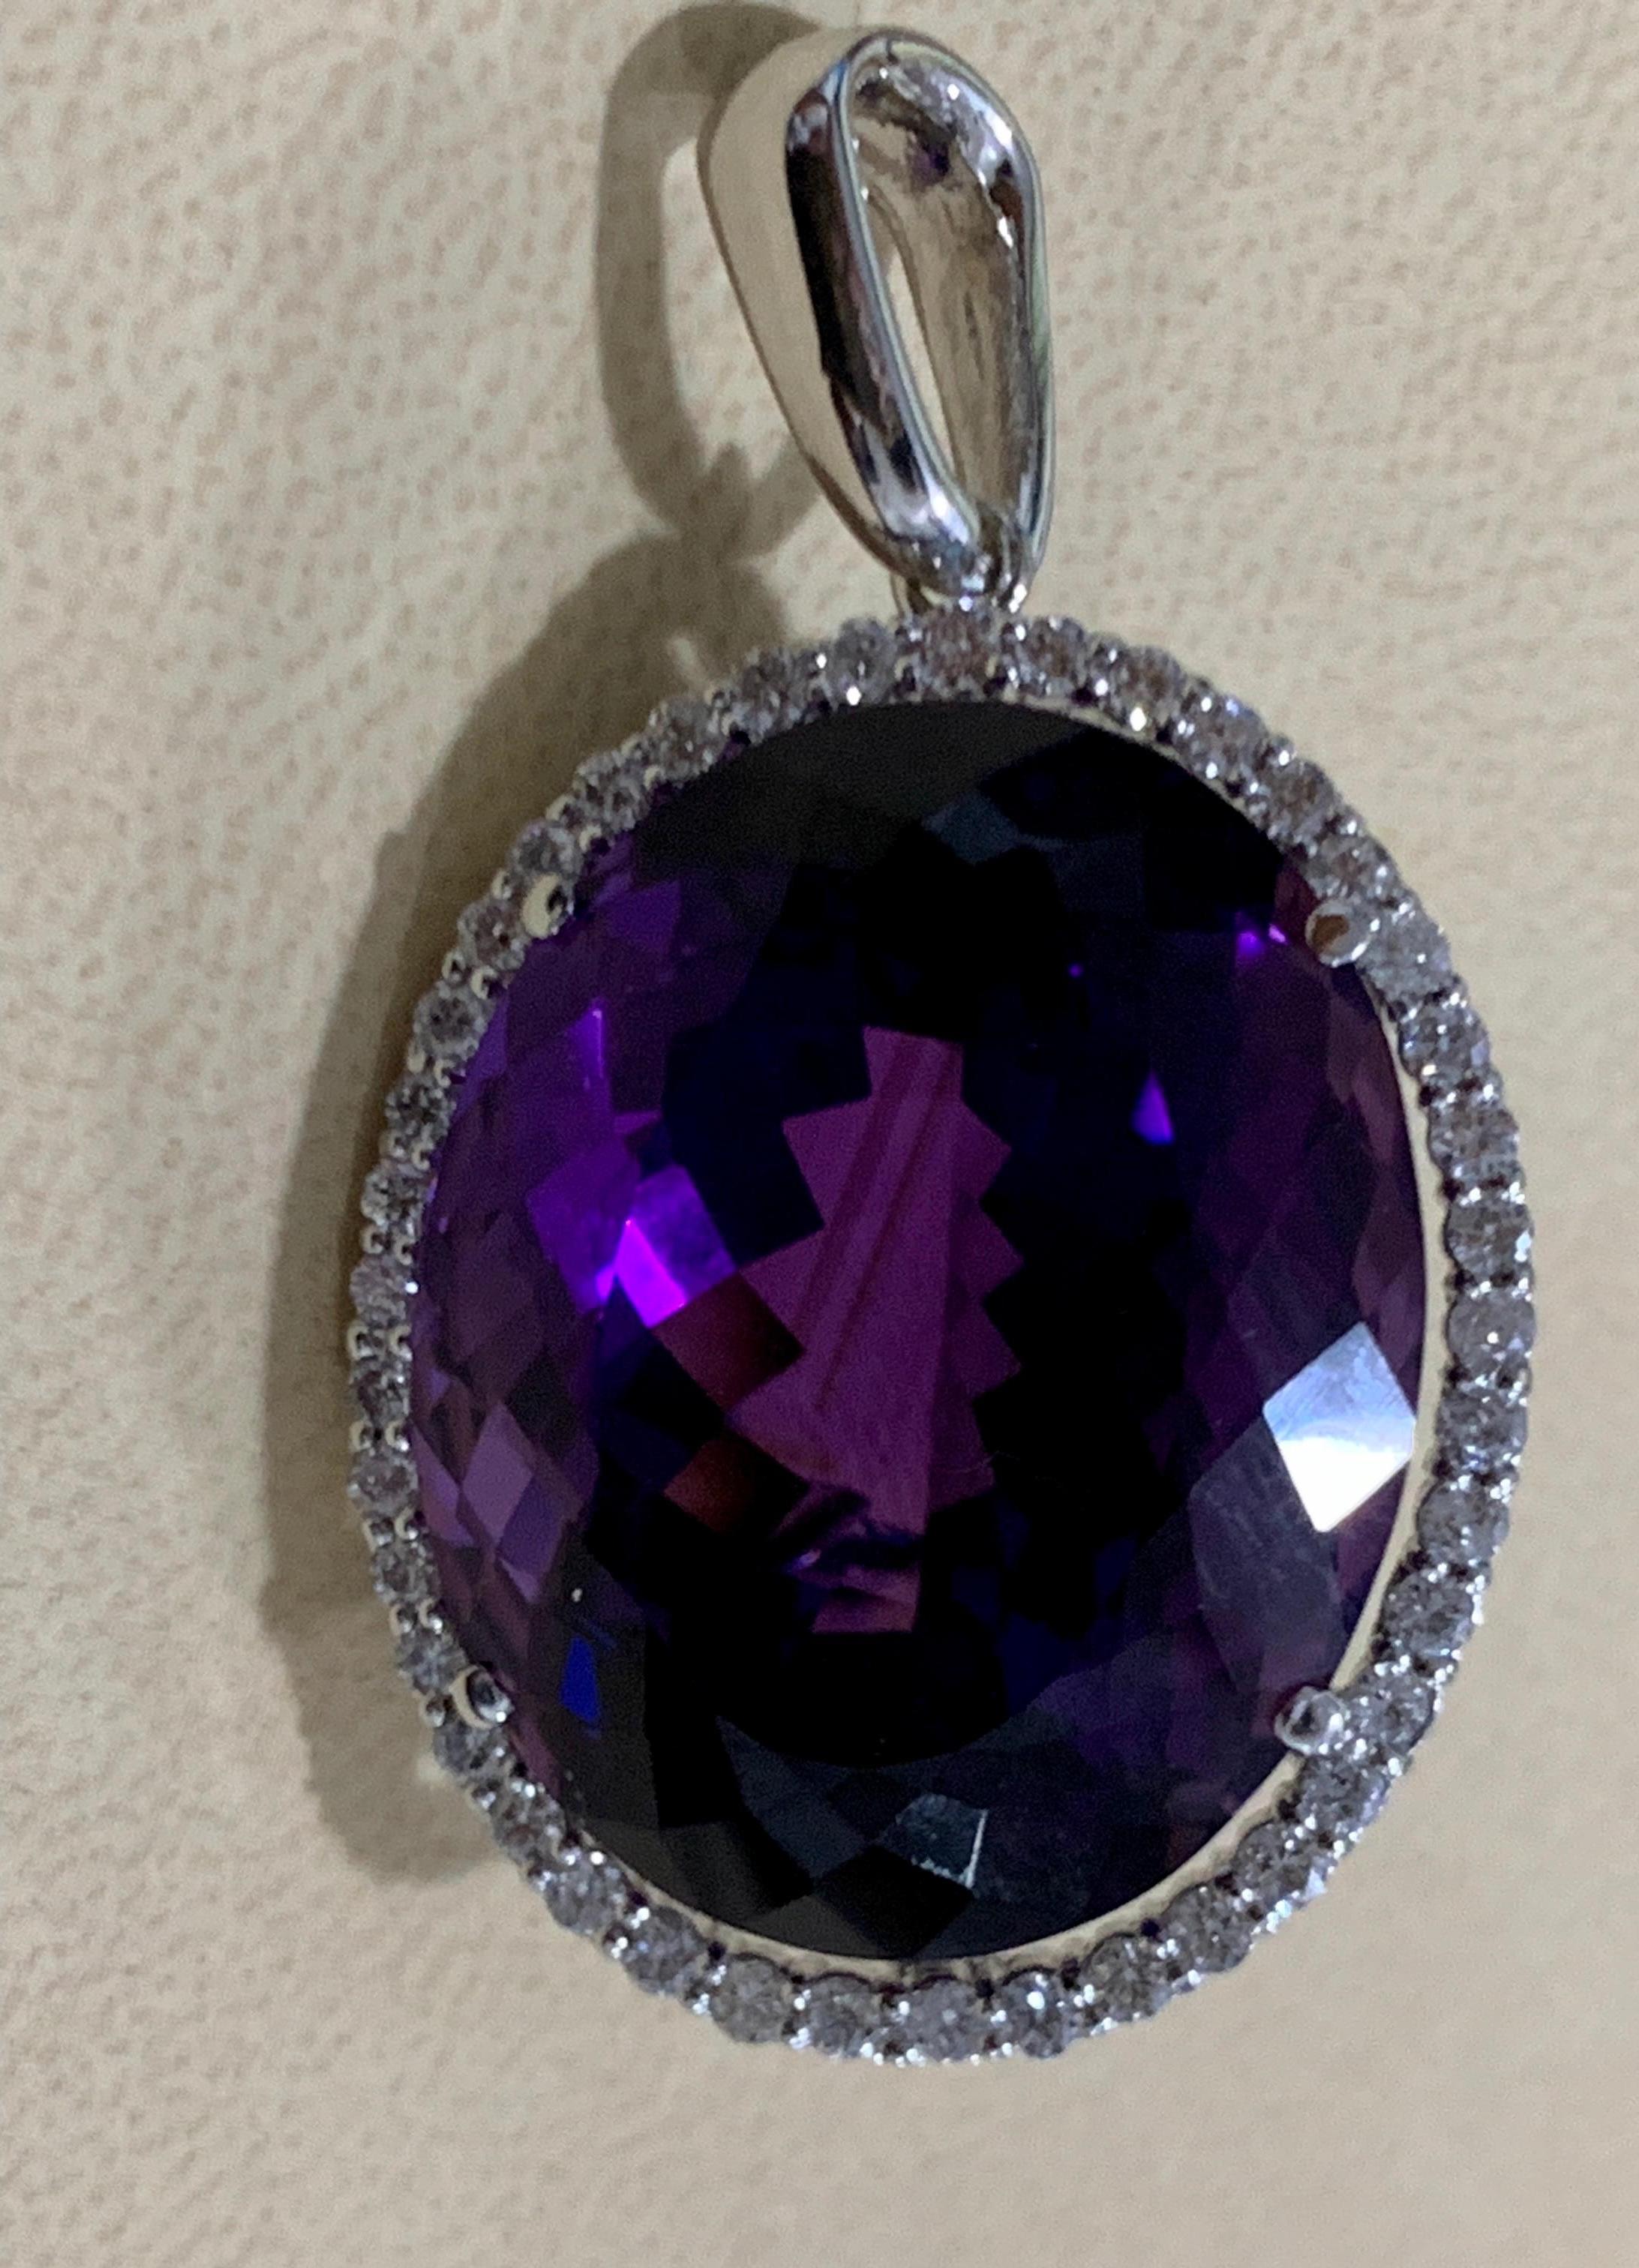  Approximately   68 Carat Amethyst & 2.2 ct Diamond Pendant Necklace 14 Karat White Gold + Chain
This spectacular Pendant Necklace  consisting of a single large Oval Amethyst , approximately  68 Carat.  The  Amethyst   Has Circle of diamonds around